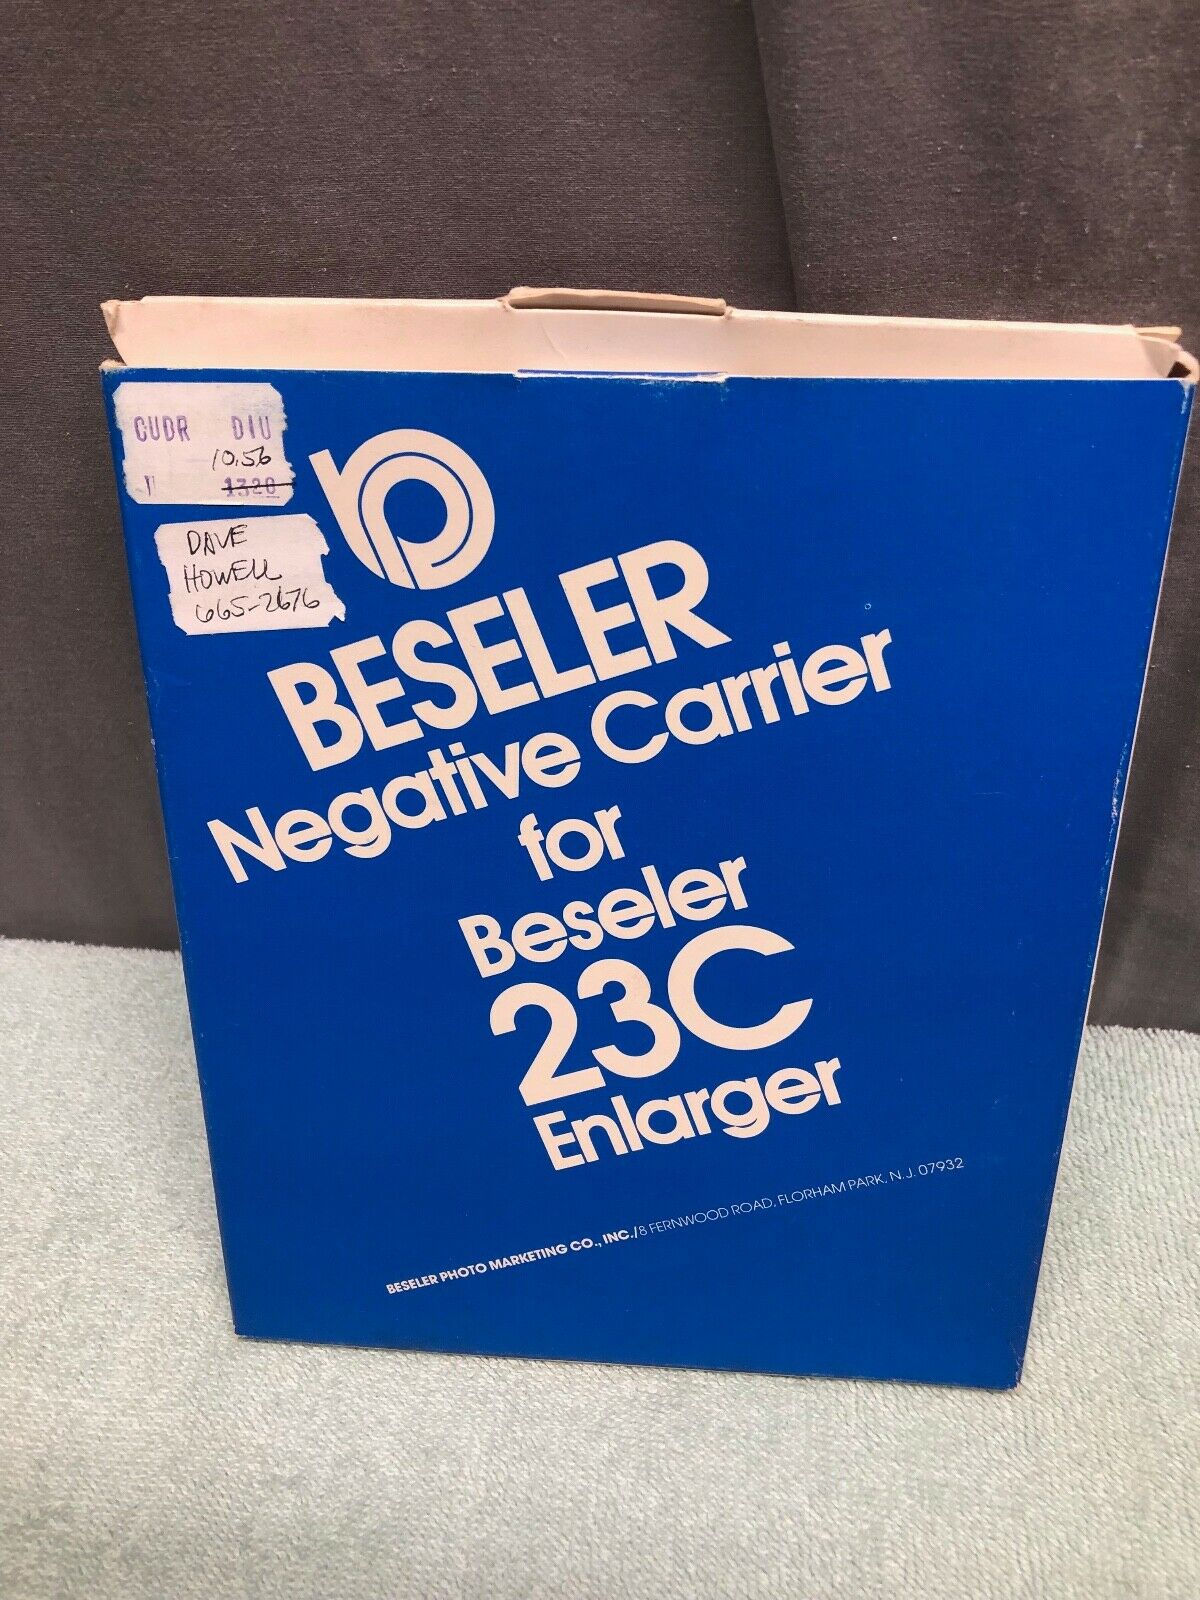 Beseler #8070 6x7 Negative Carrier for the 23C Series Enlargers